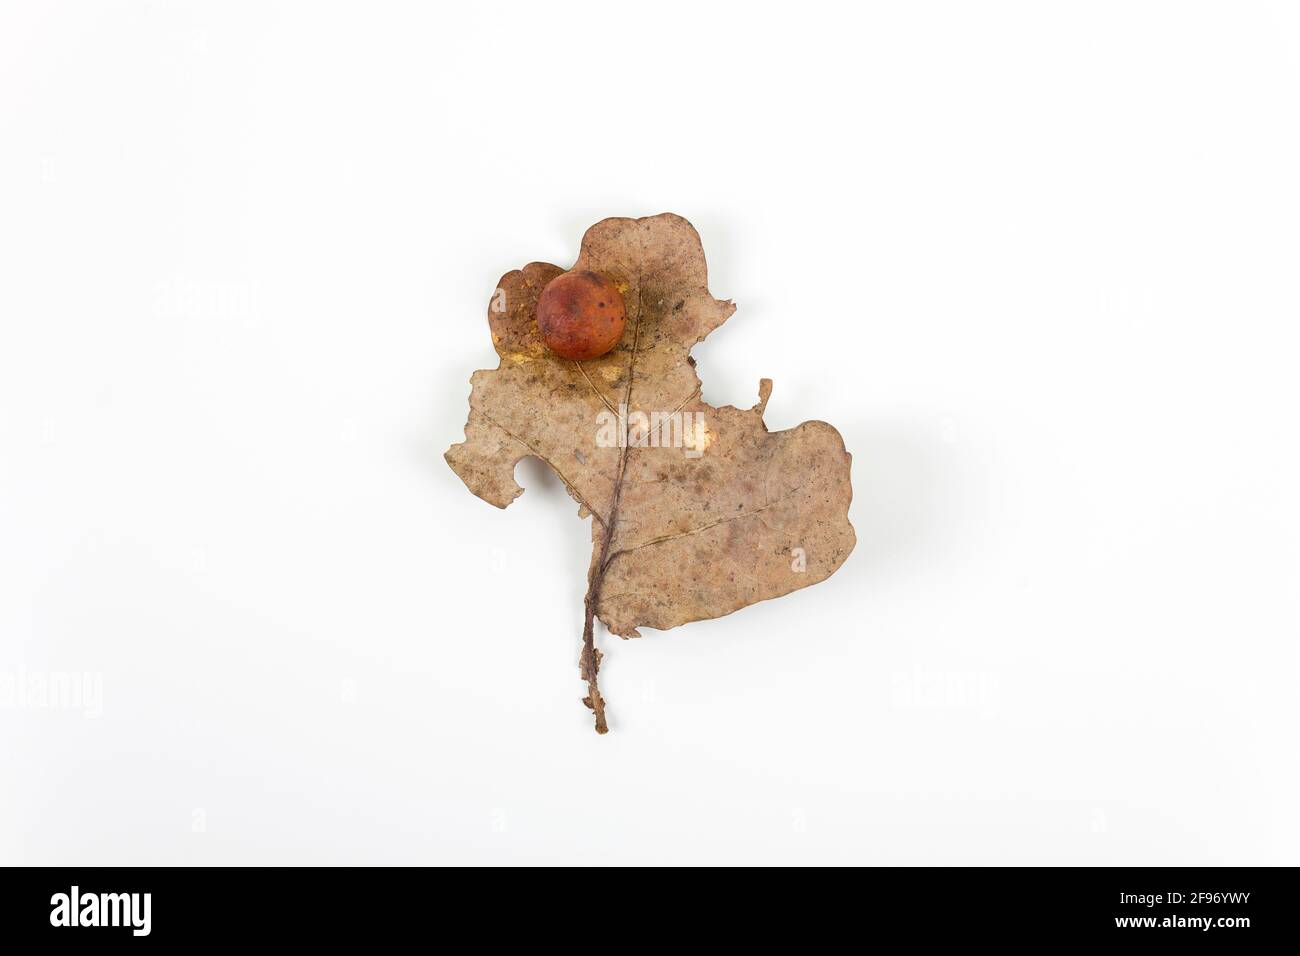 Oak apple or oak gall on a fallen dry leaf found in a forest in springtime isolated on white background. Tree infection. Flat lay. Stock Photo